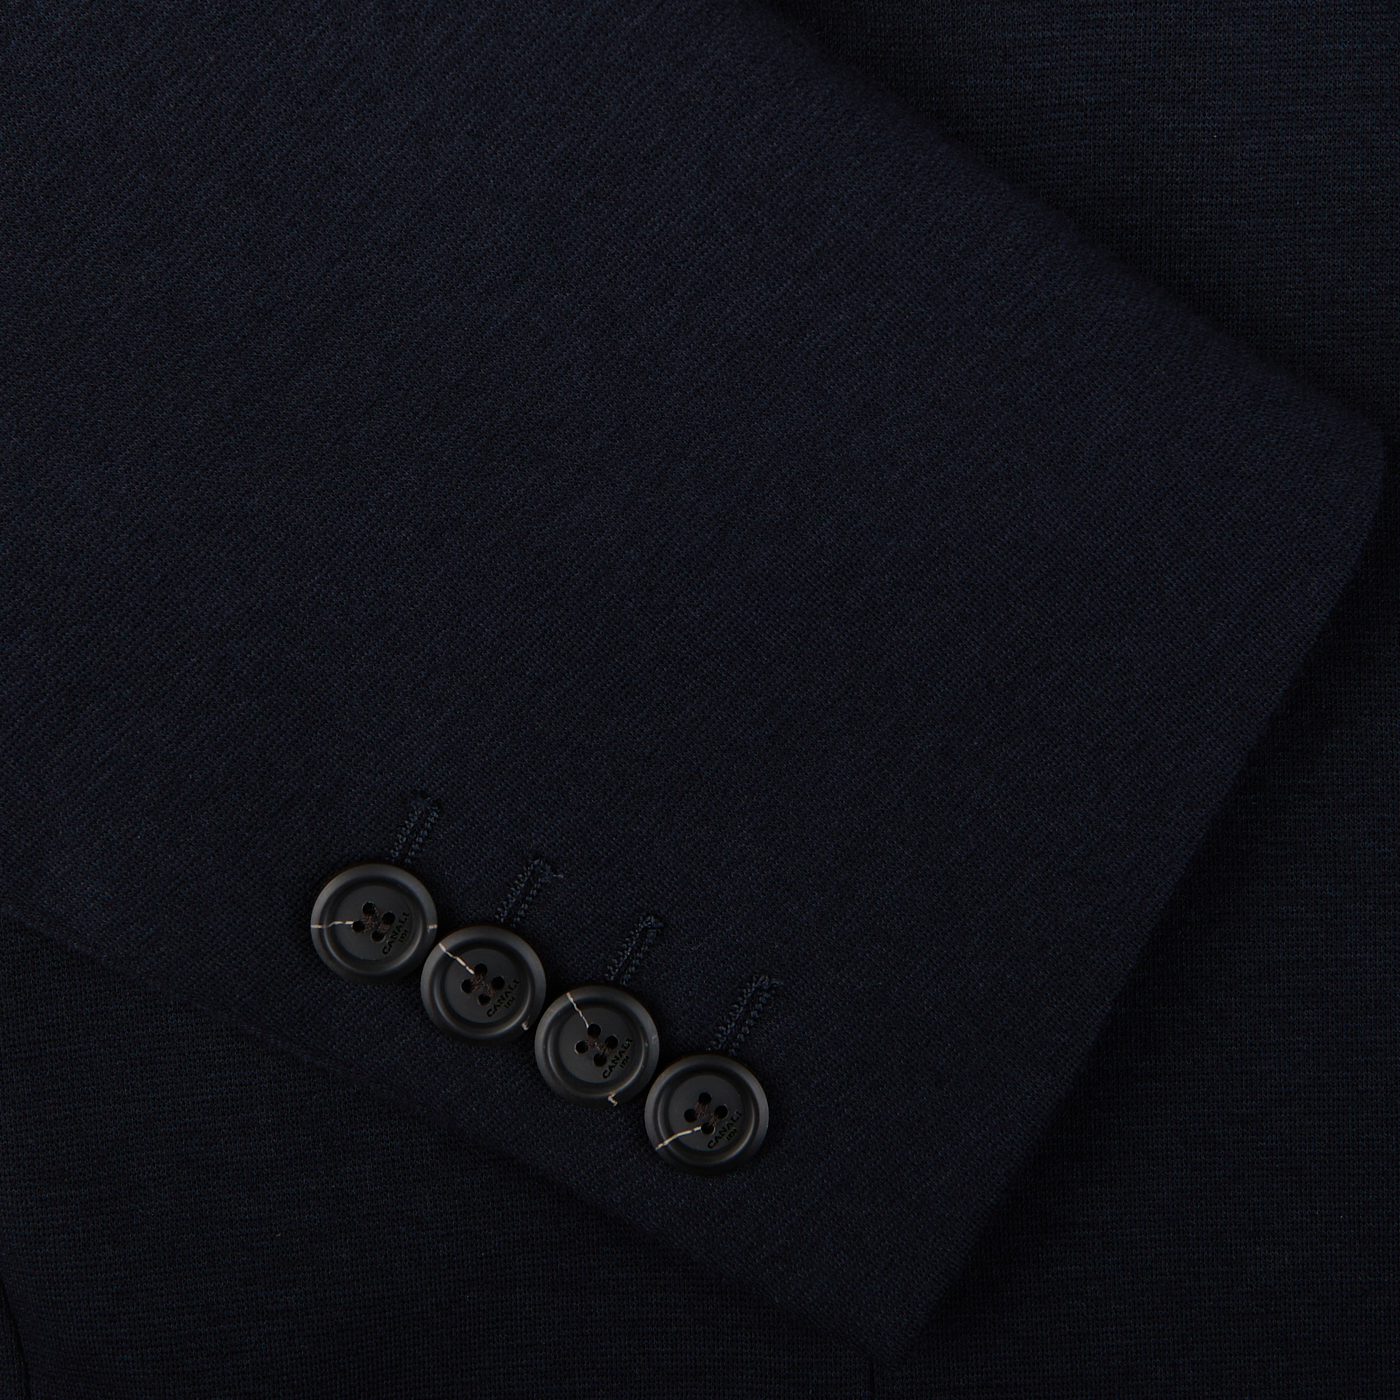 Close-up of a dark fabric with a row of four buttons, likely part of a Canali Navy Cotton Jersey Unconstructed Blazer.